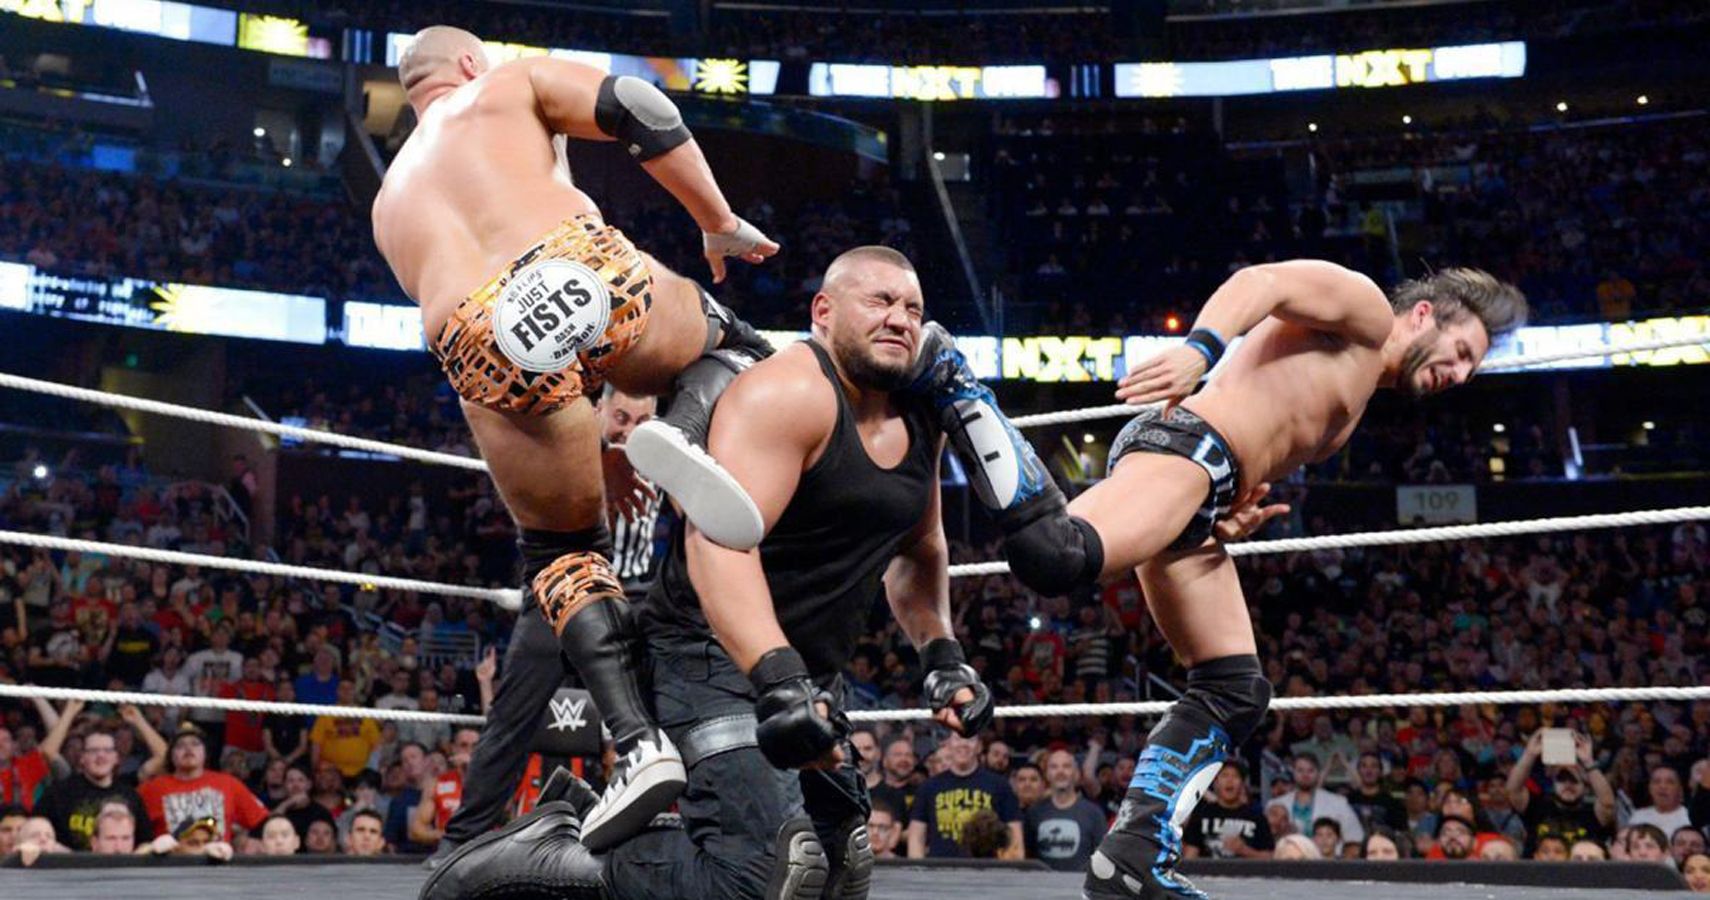 DIY vs. The Authors of Pain vs. The Revival (NXT Takeover: Orlando)